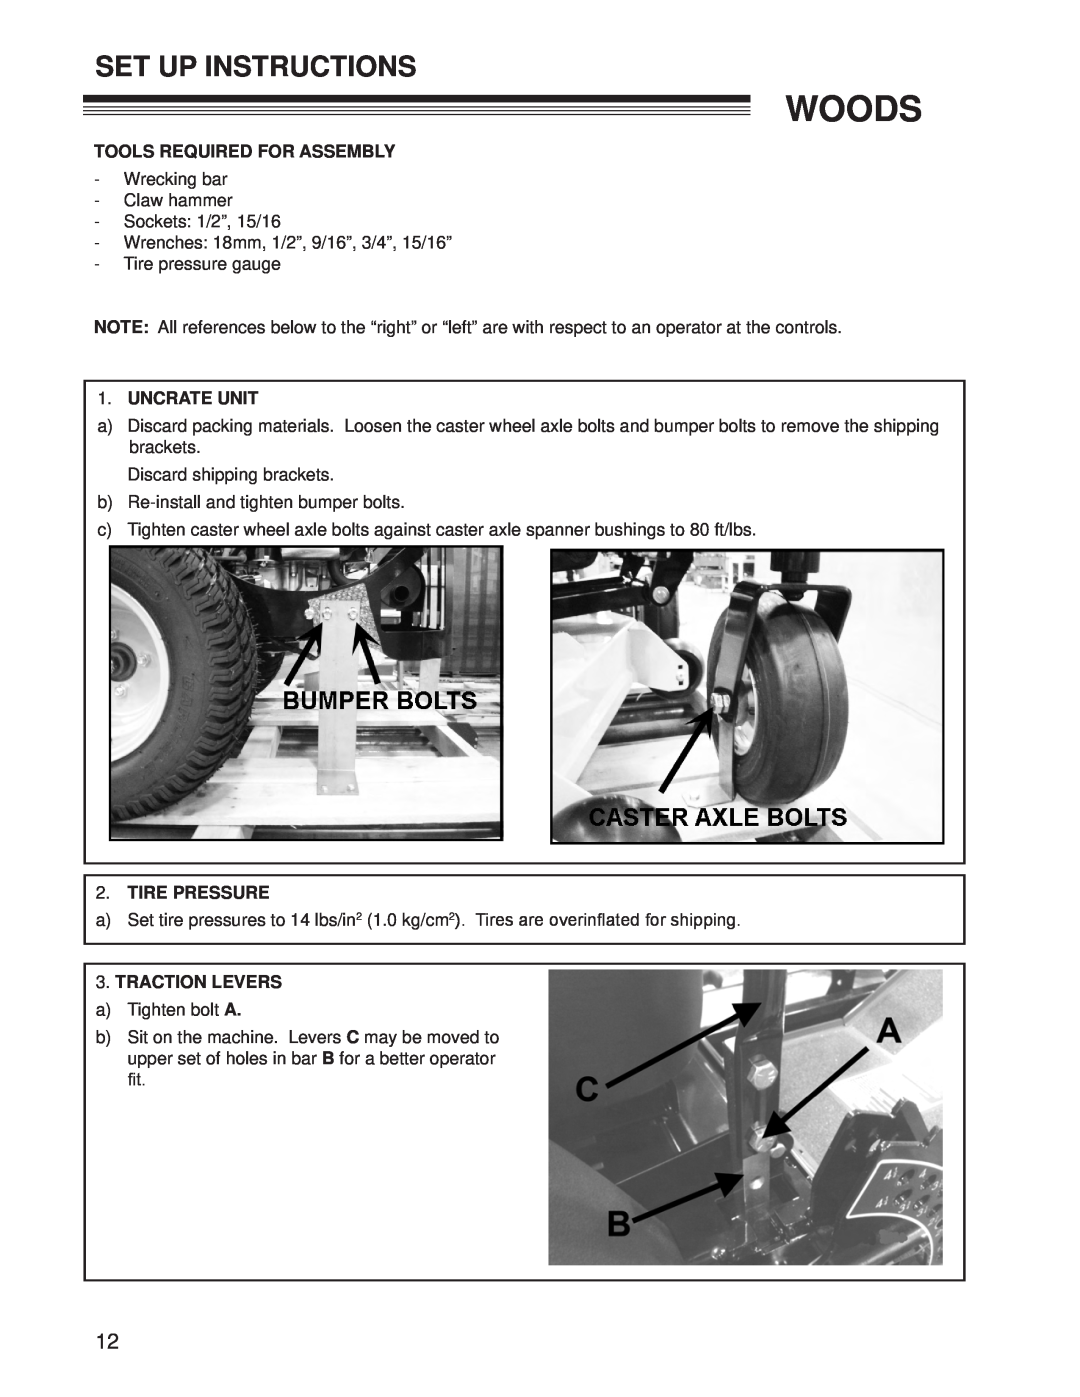 Woods Equipment CZR2652B, CZR2242B Set Up Instructions, Woods, Tools Required For Assembly, Uncrate Unit, Tire Pressure 